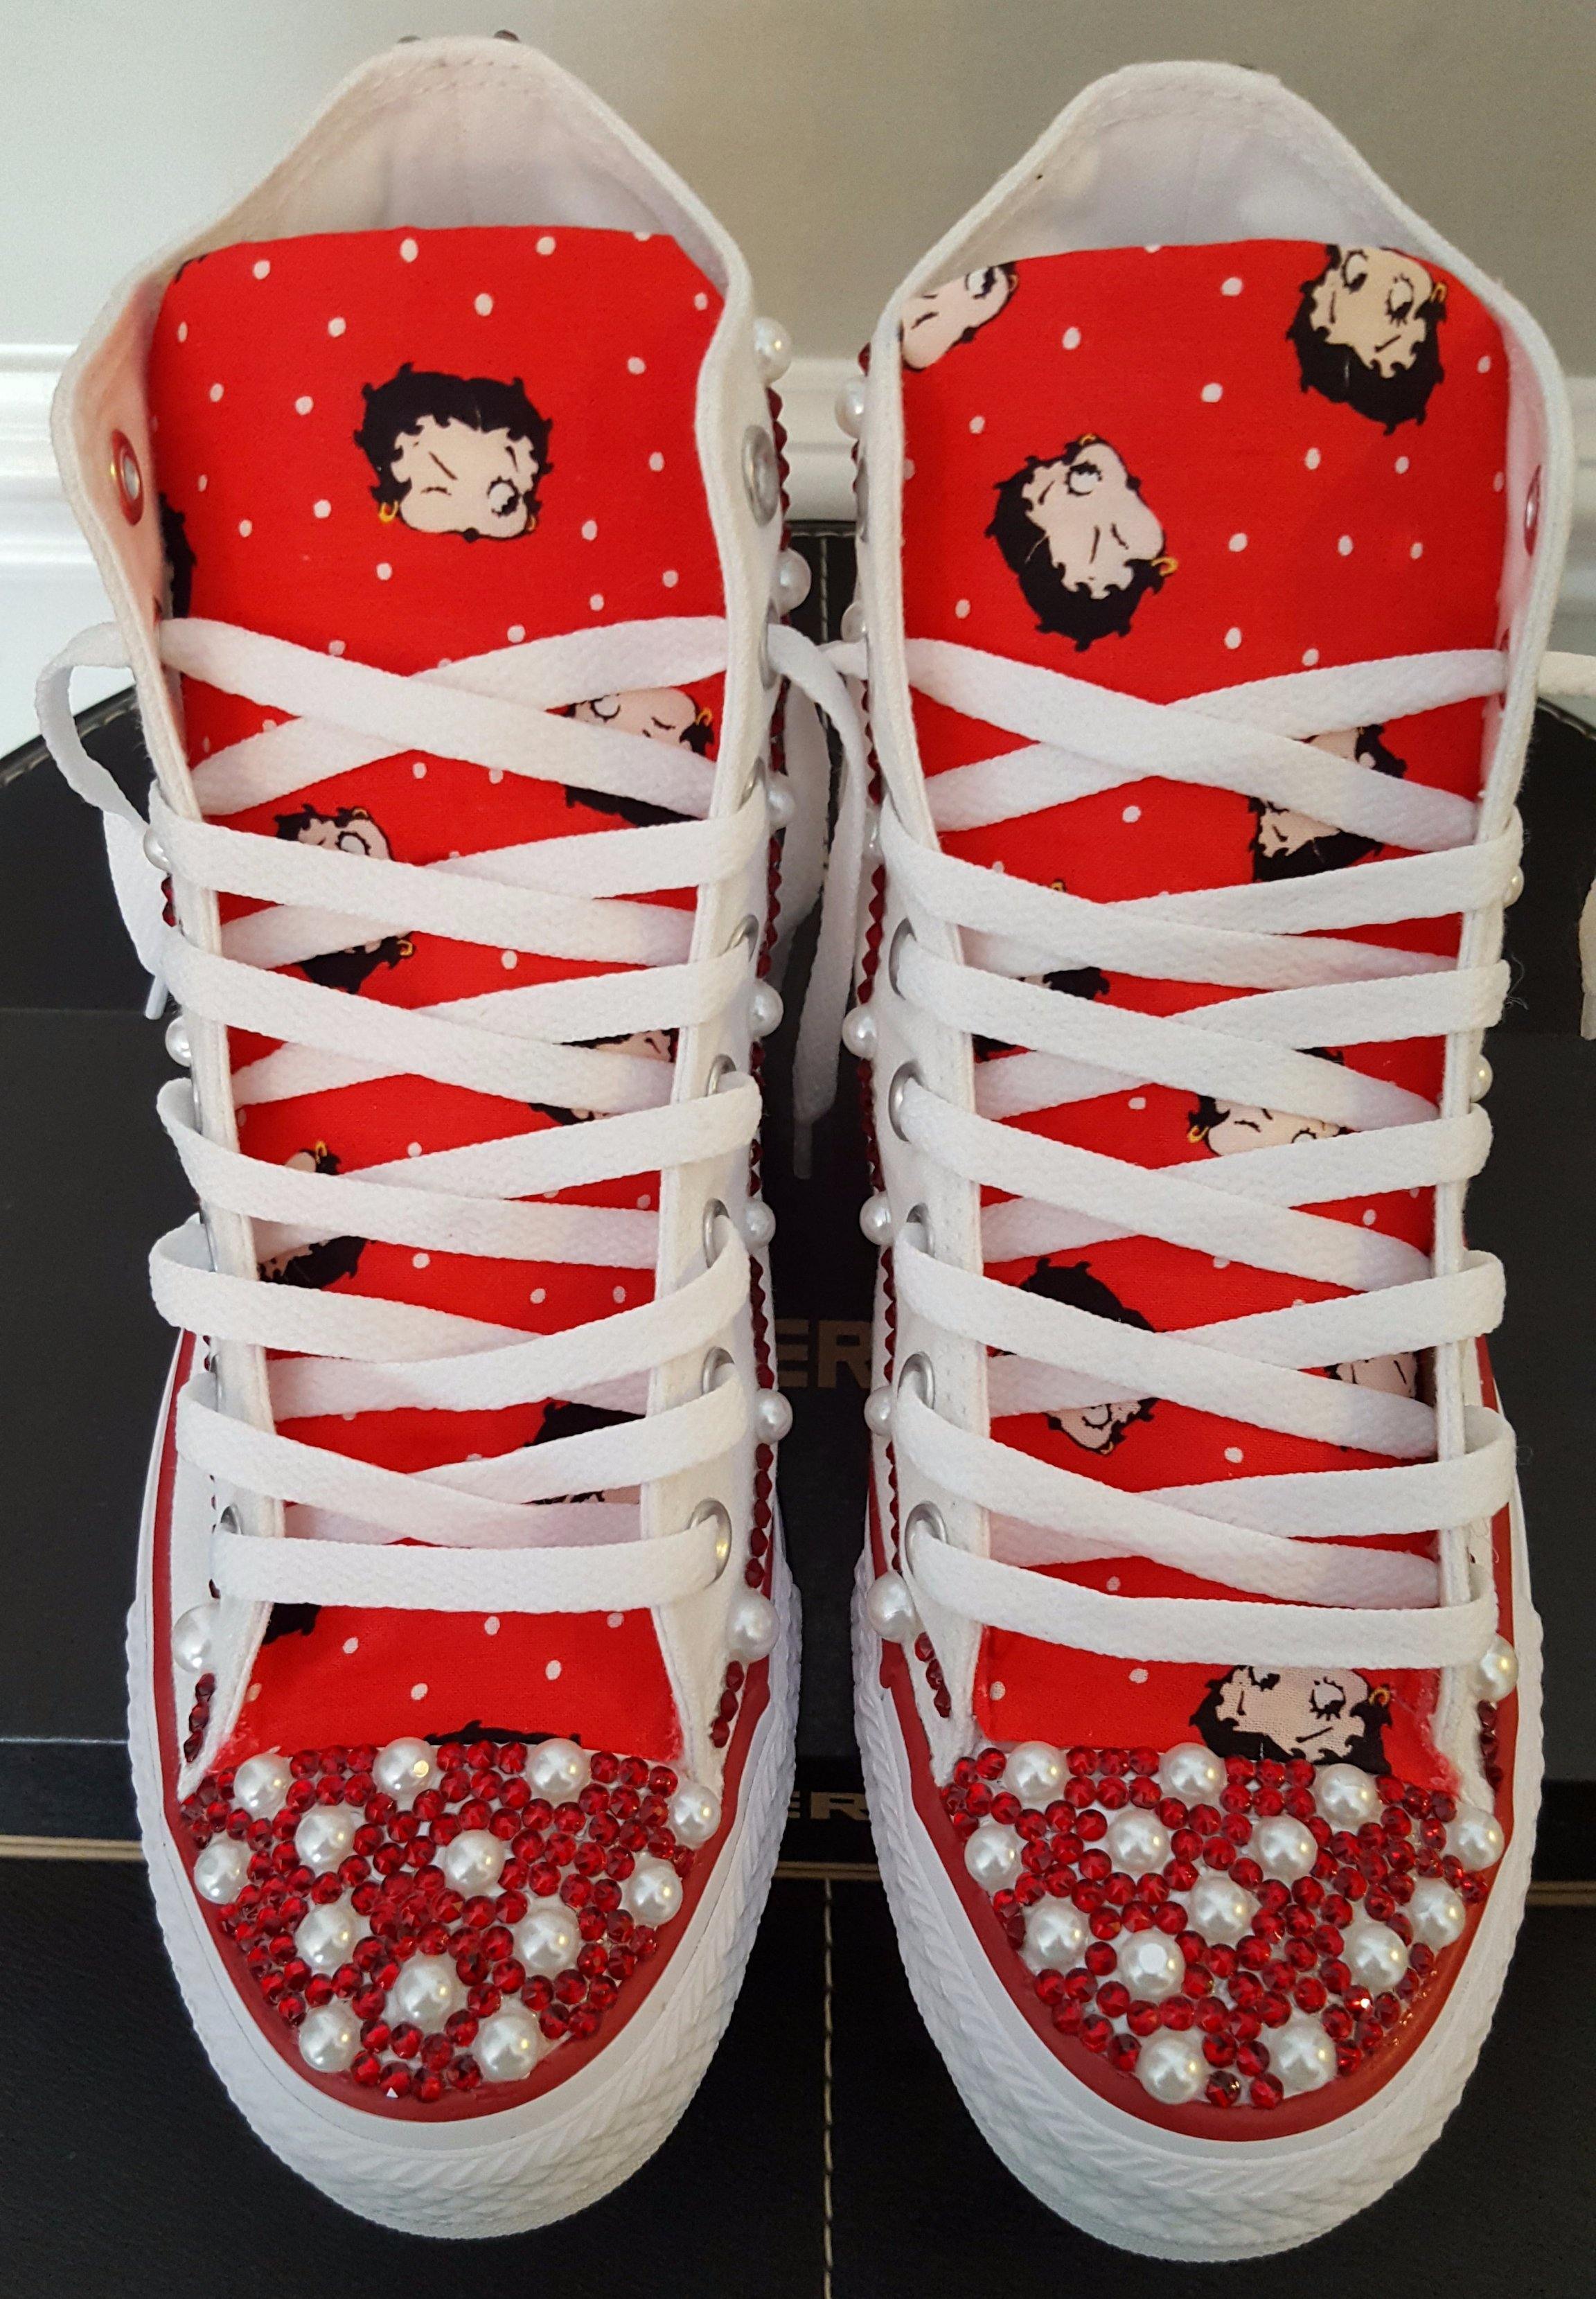 Bedazzled BETTY BOOP High-Top Converses- Special Edition. Get Bedazzled